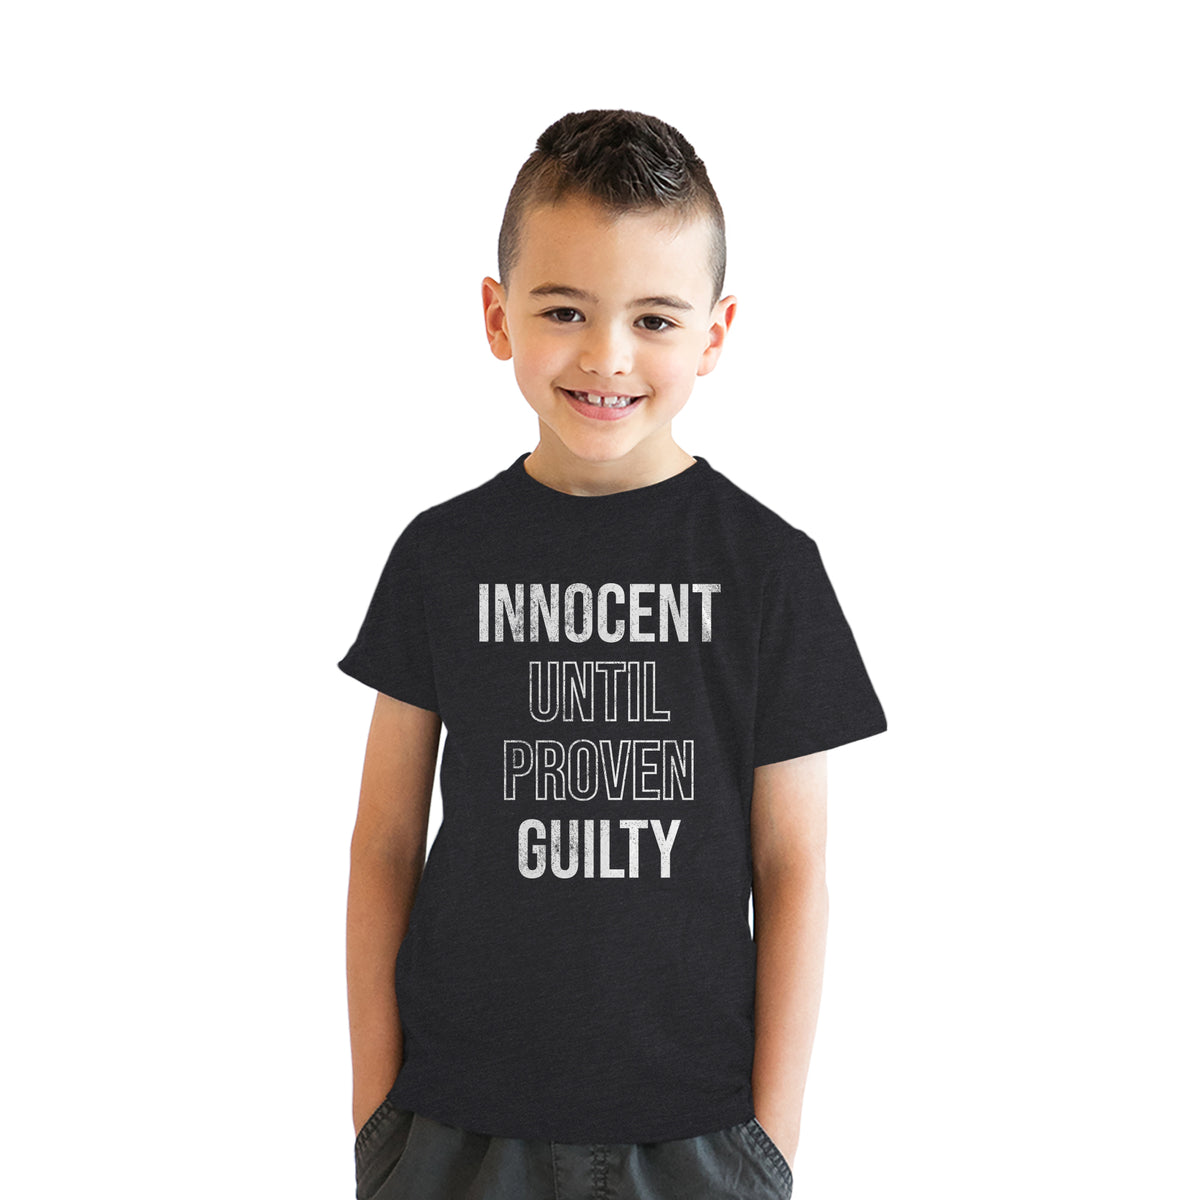 Innocent Until Proven Guilty Youth Tshirt